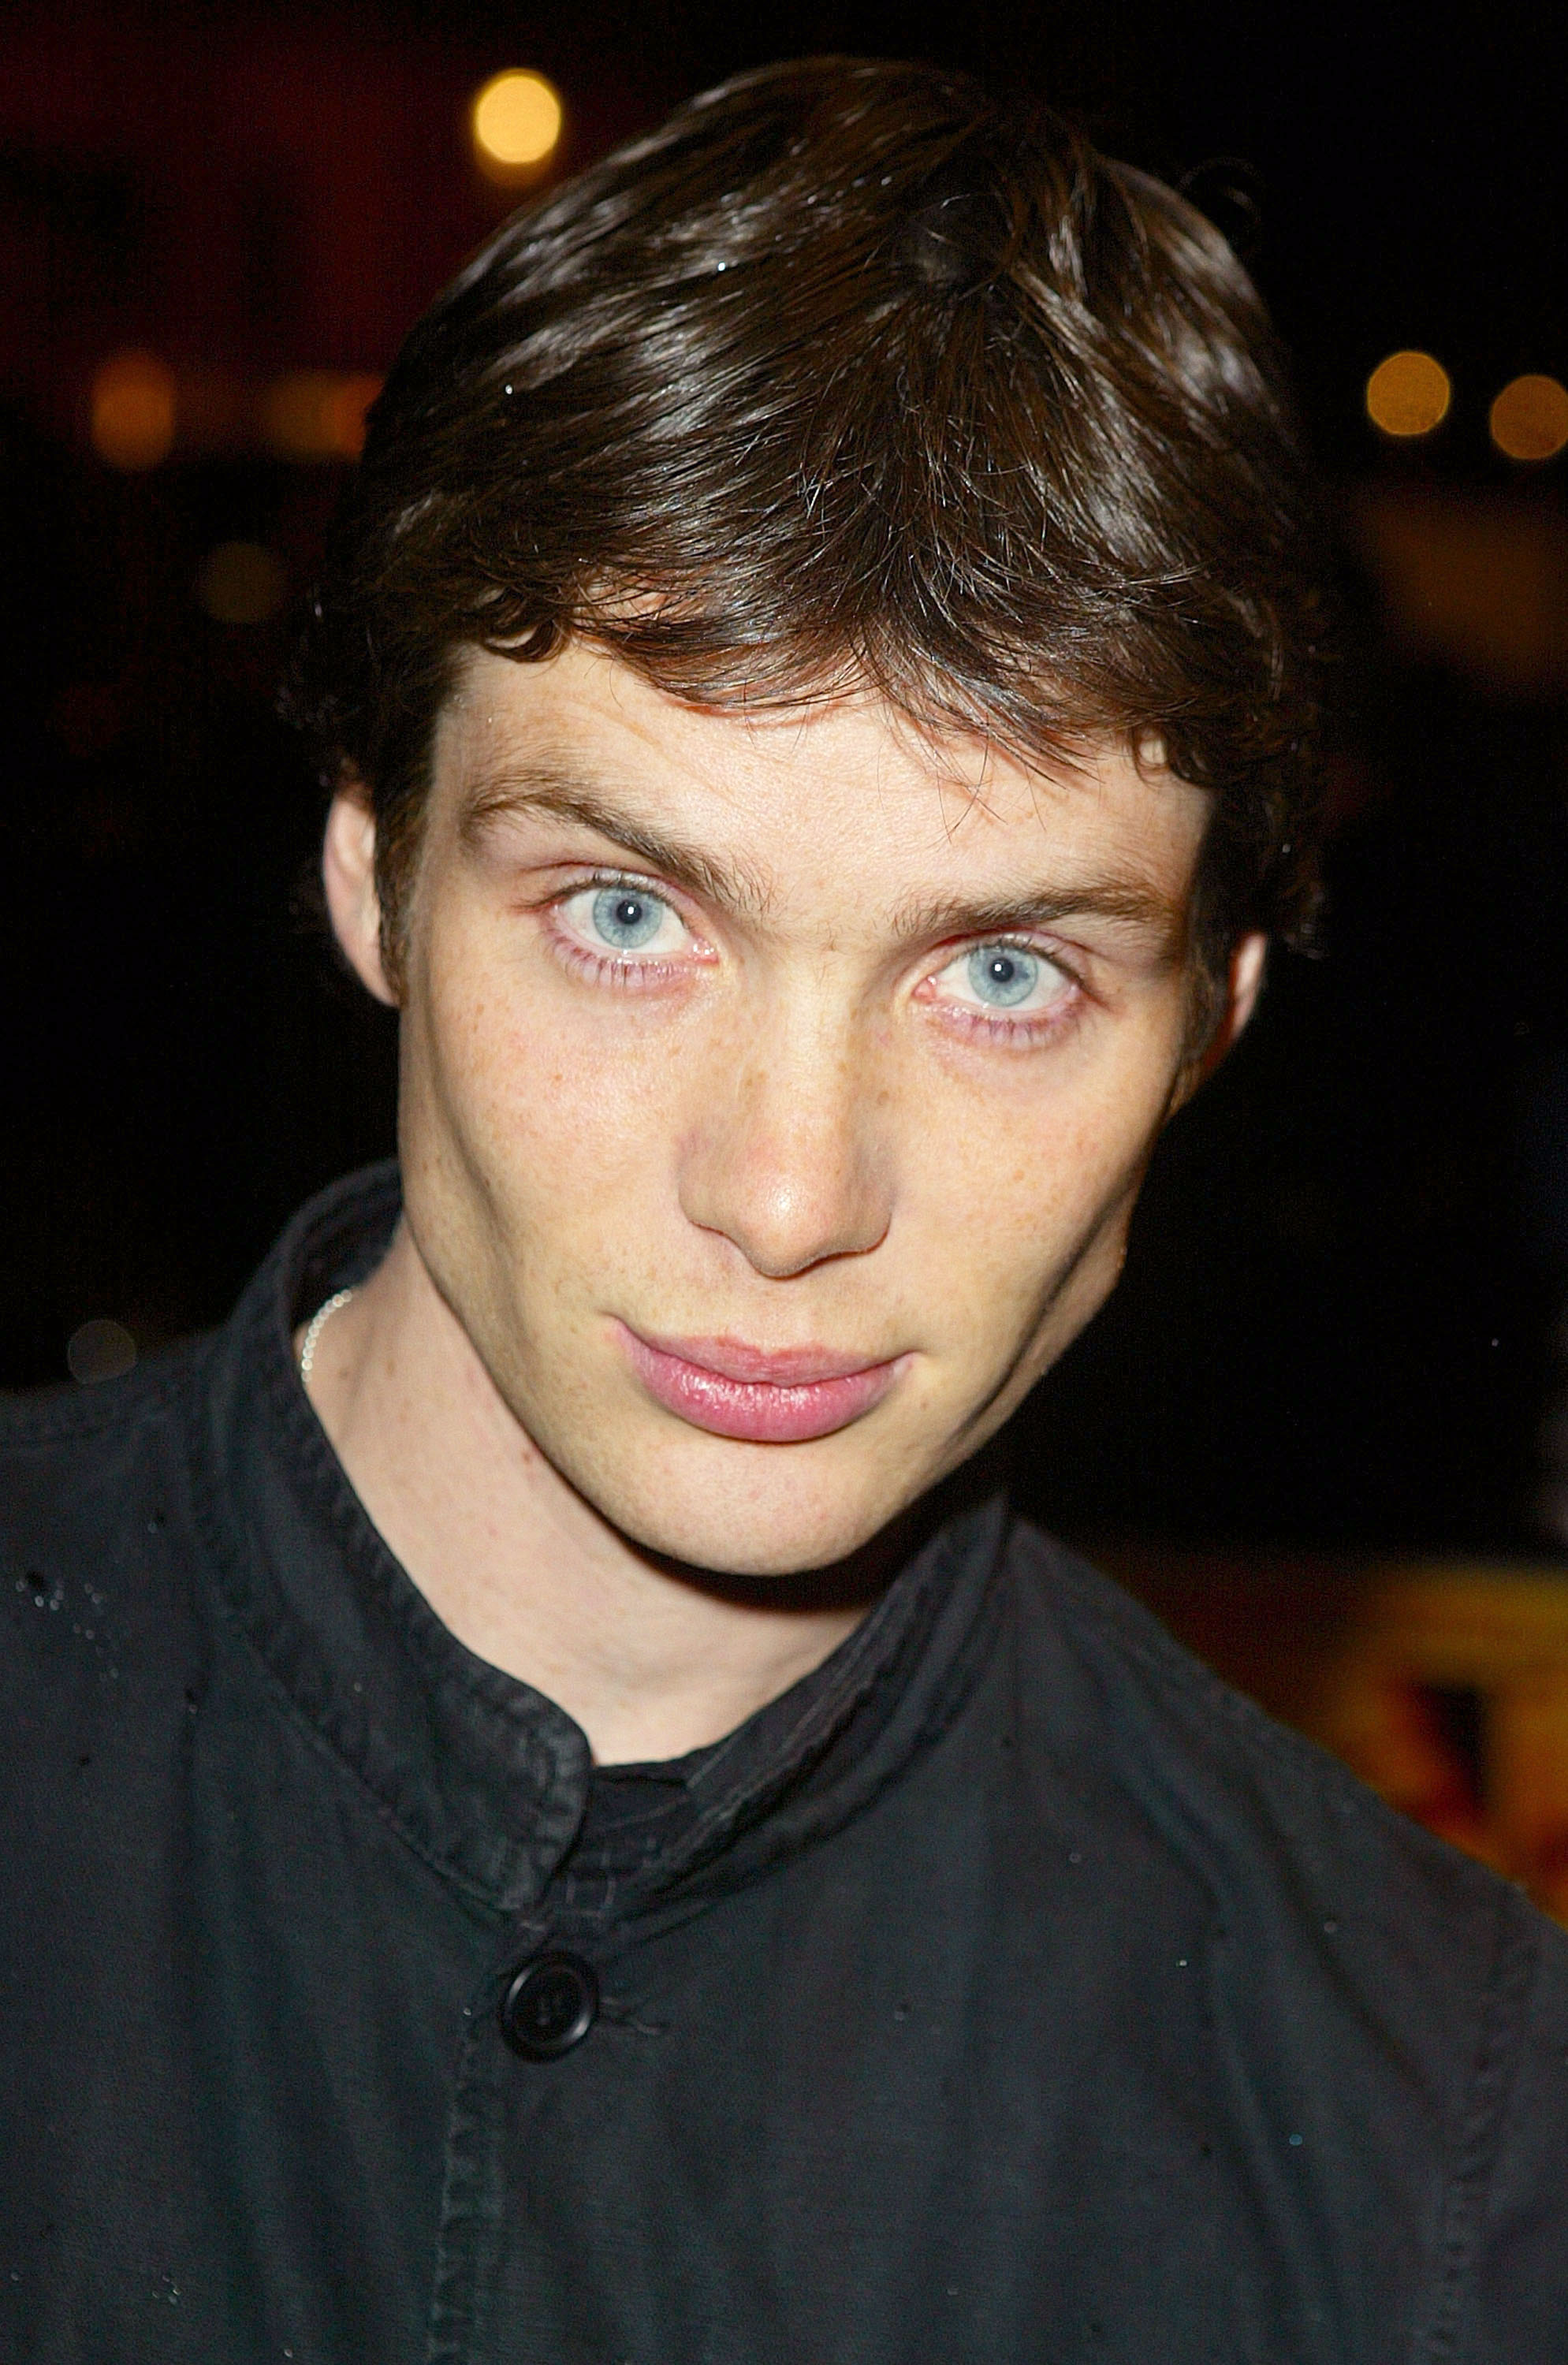 Cillian Murphy during the London premiere "Intermission," 2011 | Source: Getty Images